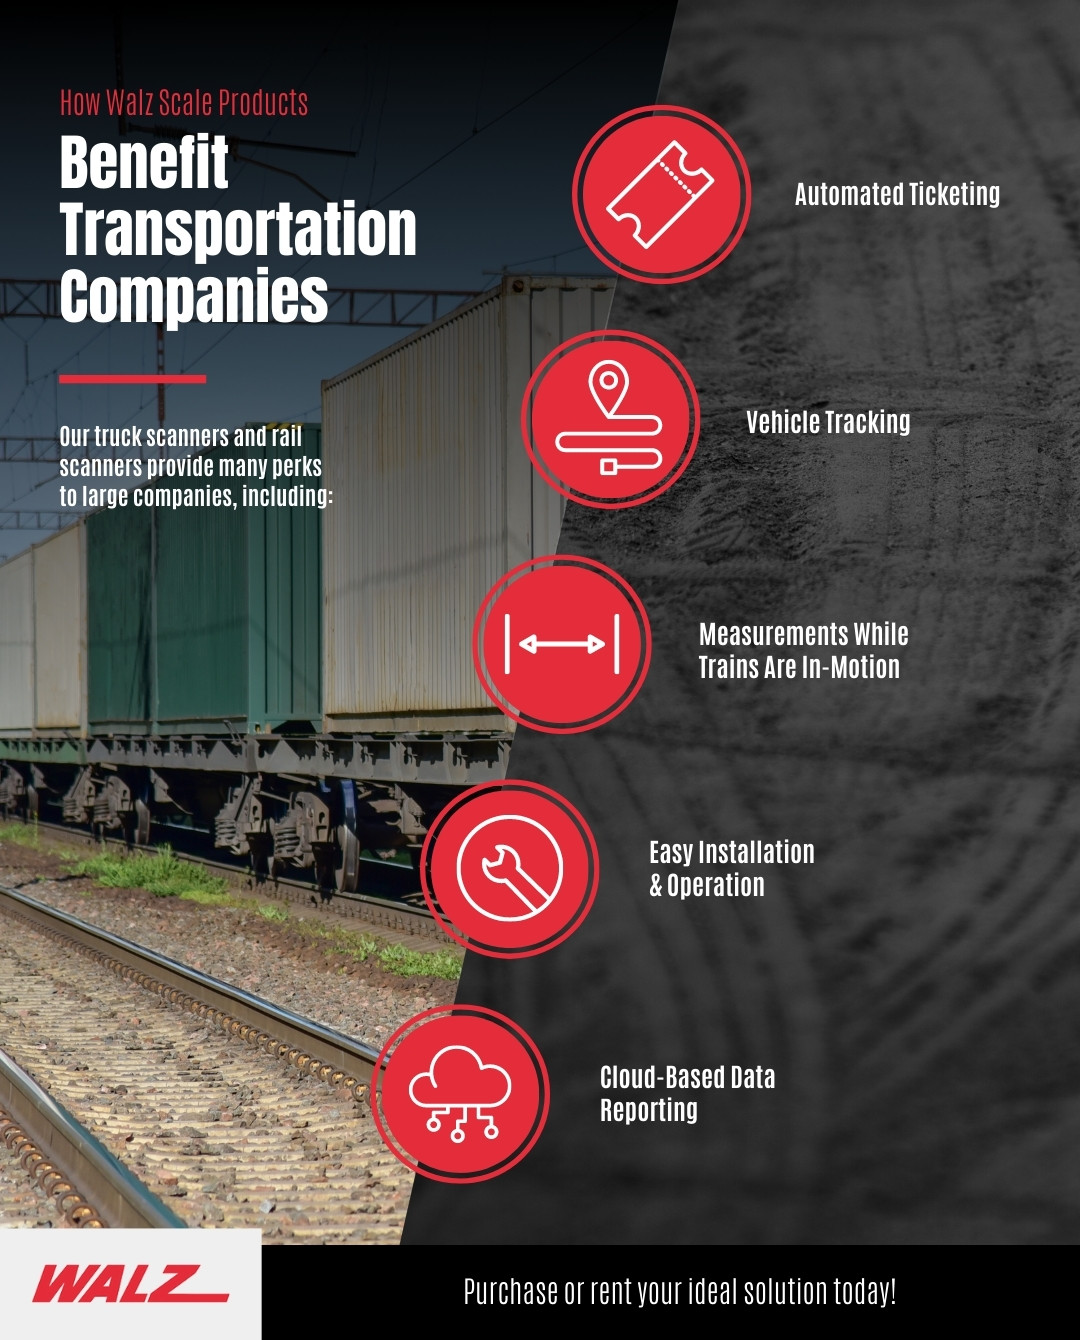 How Walz Scale Products Benefit Transportation Companies Infographic